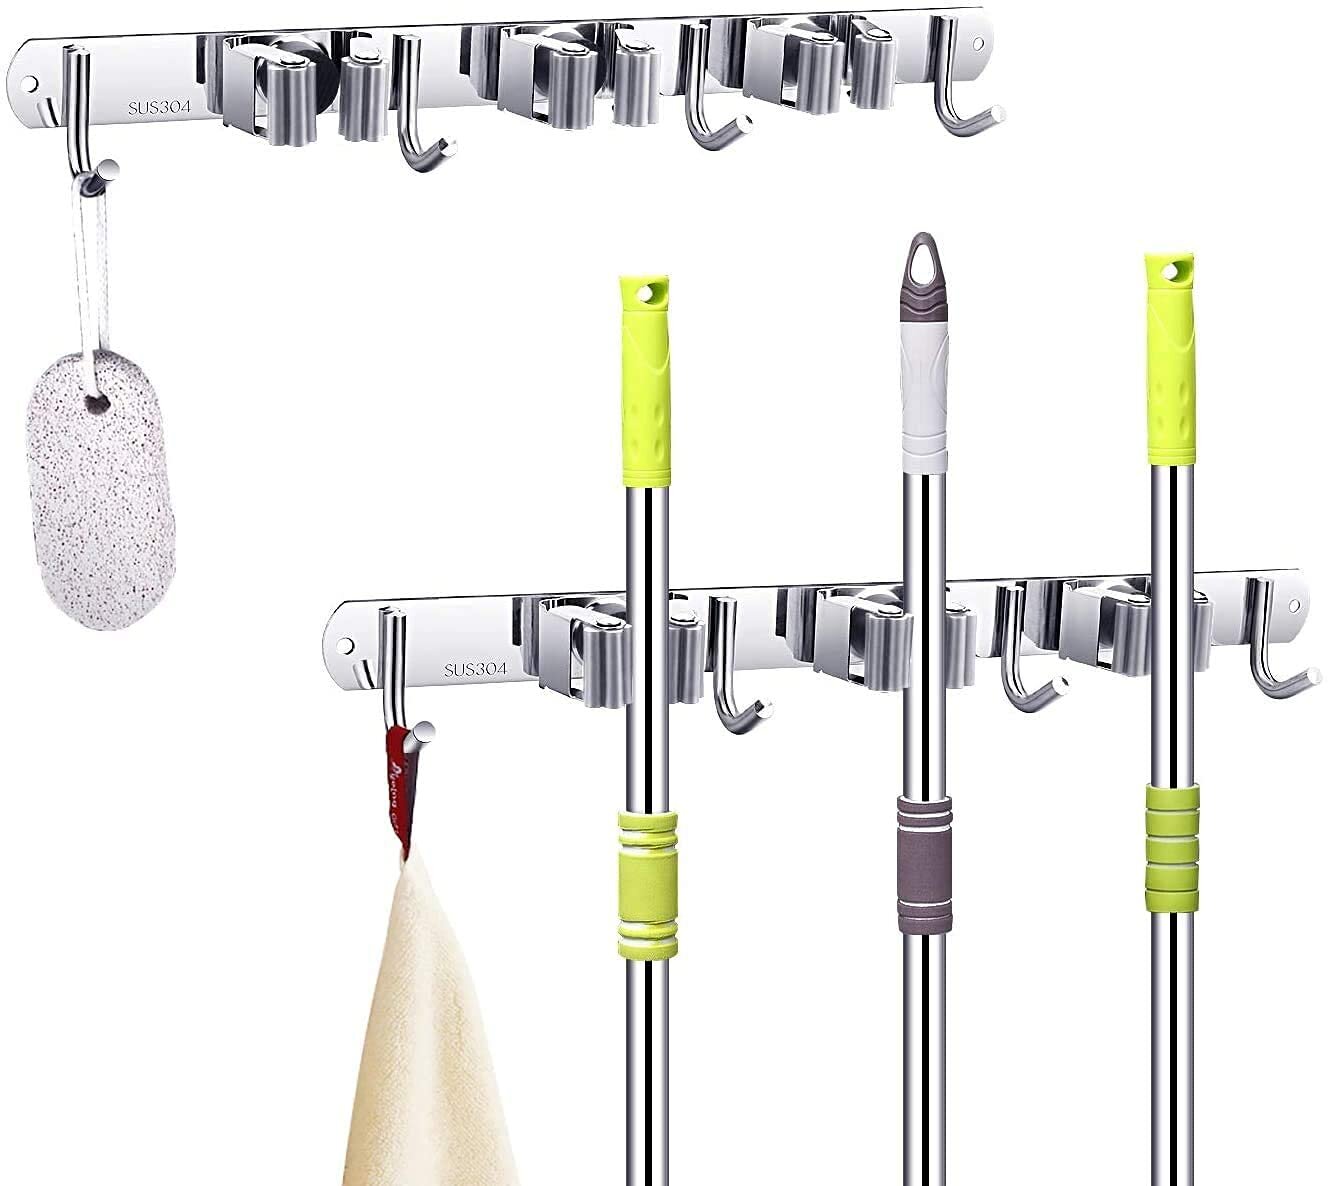 3 Positions Hooks Heavy Duty Broom Mop Handle Holder for Kitchen Garage Multifunctional S-Type Wall Mounted Cleaning Tools Organizer SUS304 Stainless Steel Mop Broom Holder Organizer